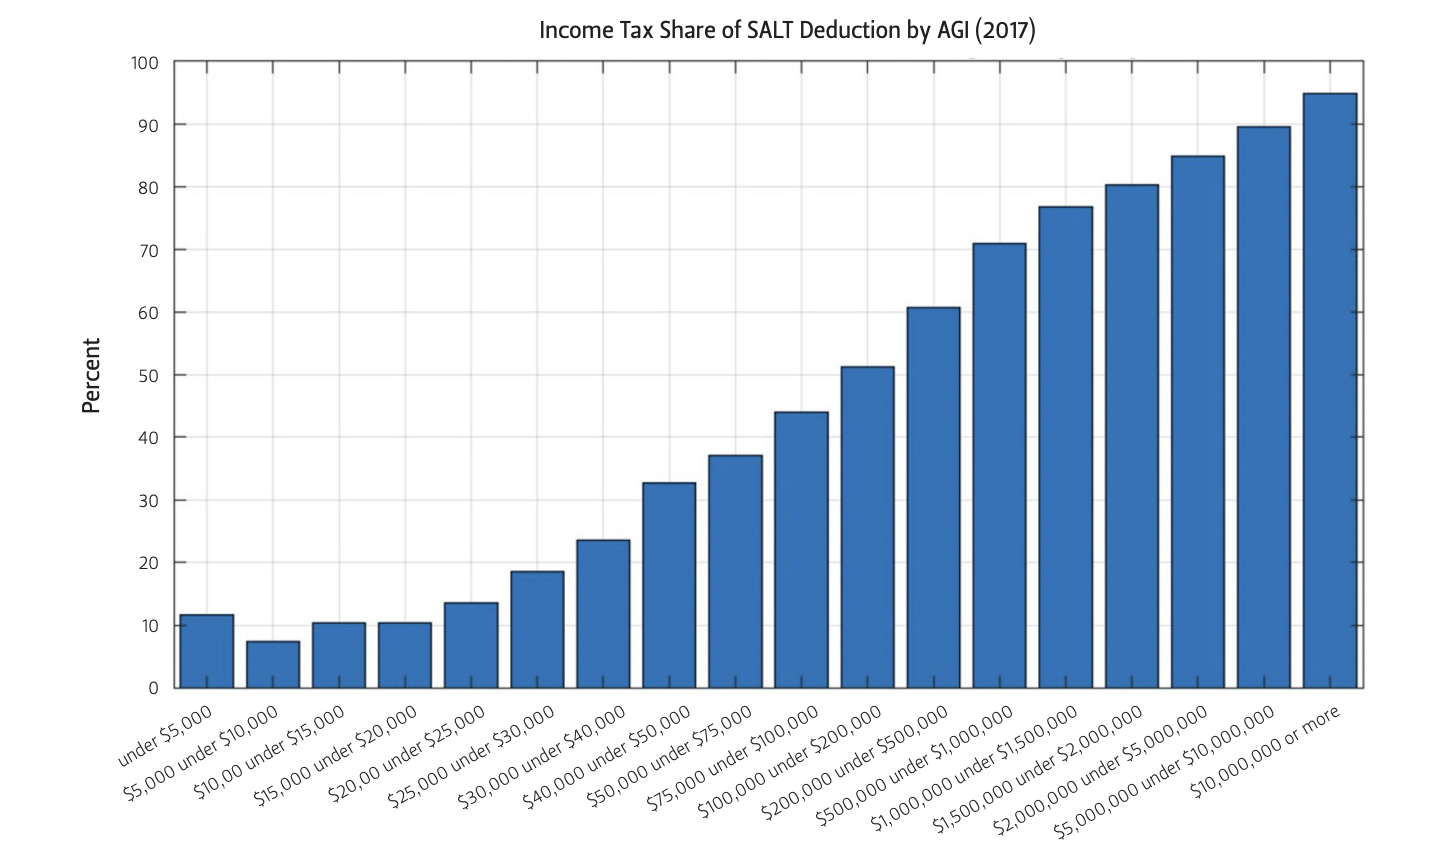 FIGURE 4 — PERCENT CONTRIBUTION OF STATE AND LOCAL INCOME TAXES TO THE TOTAL SALT DEDUCTION BY AGI IN 2017